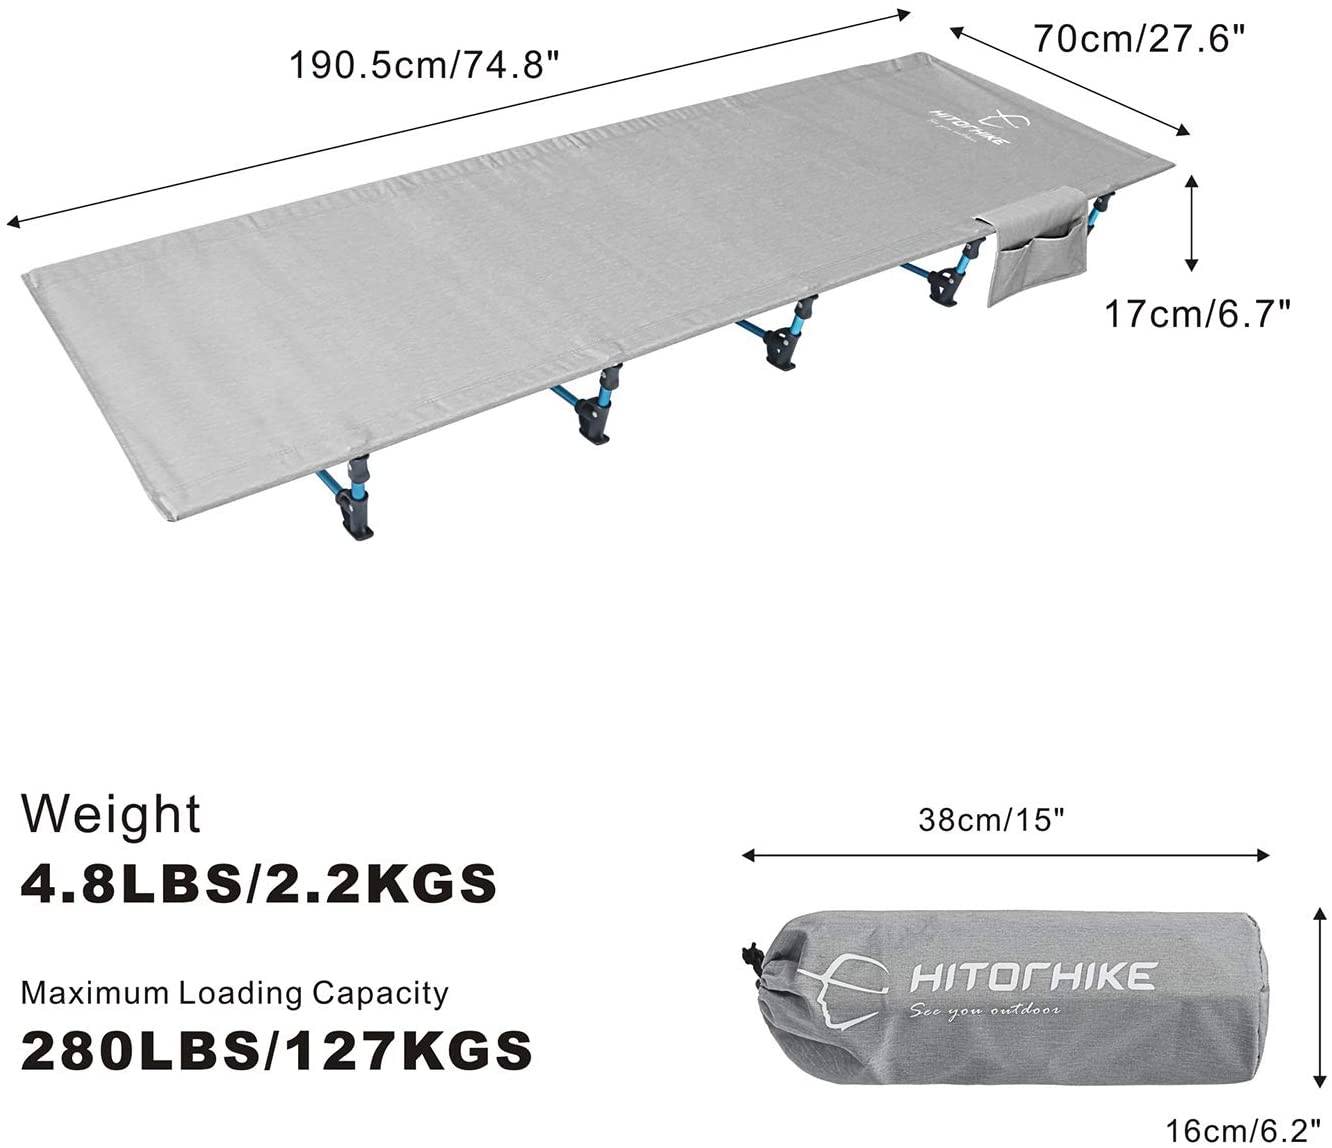 Hitorhike ultralight cot, Hiking cot, camping cot, overland camping cotHitorhike ultralight cot, Hiking cot, camping cot, overland camping cot, Portable Cot, lightweight Cot